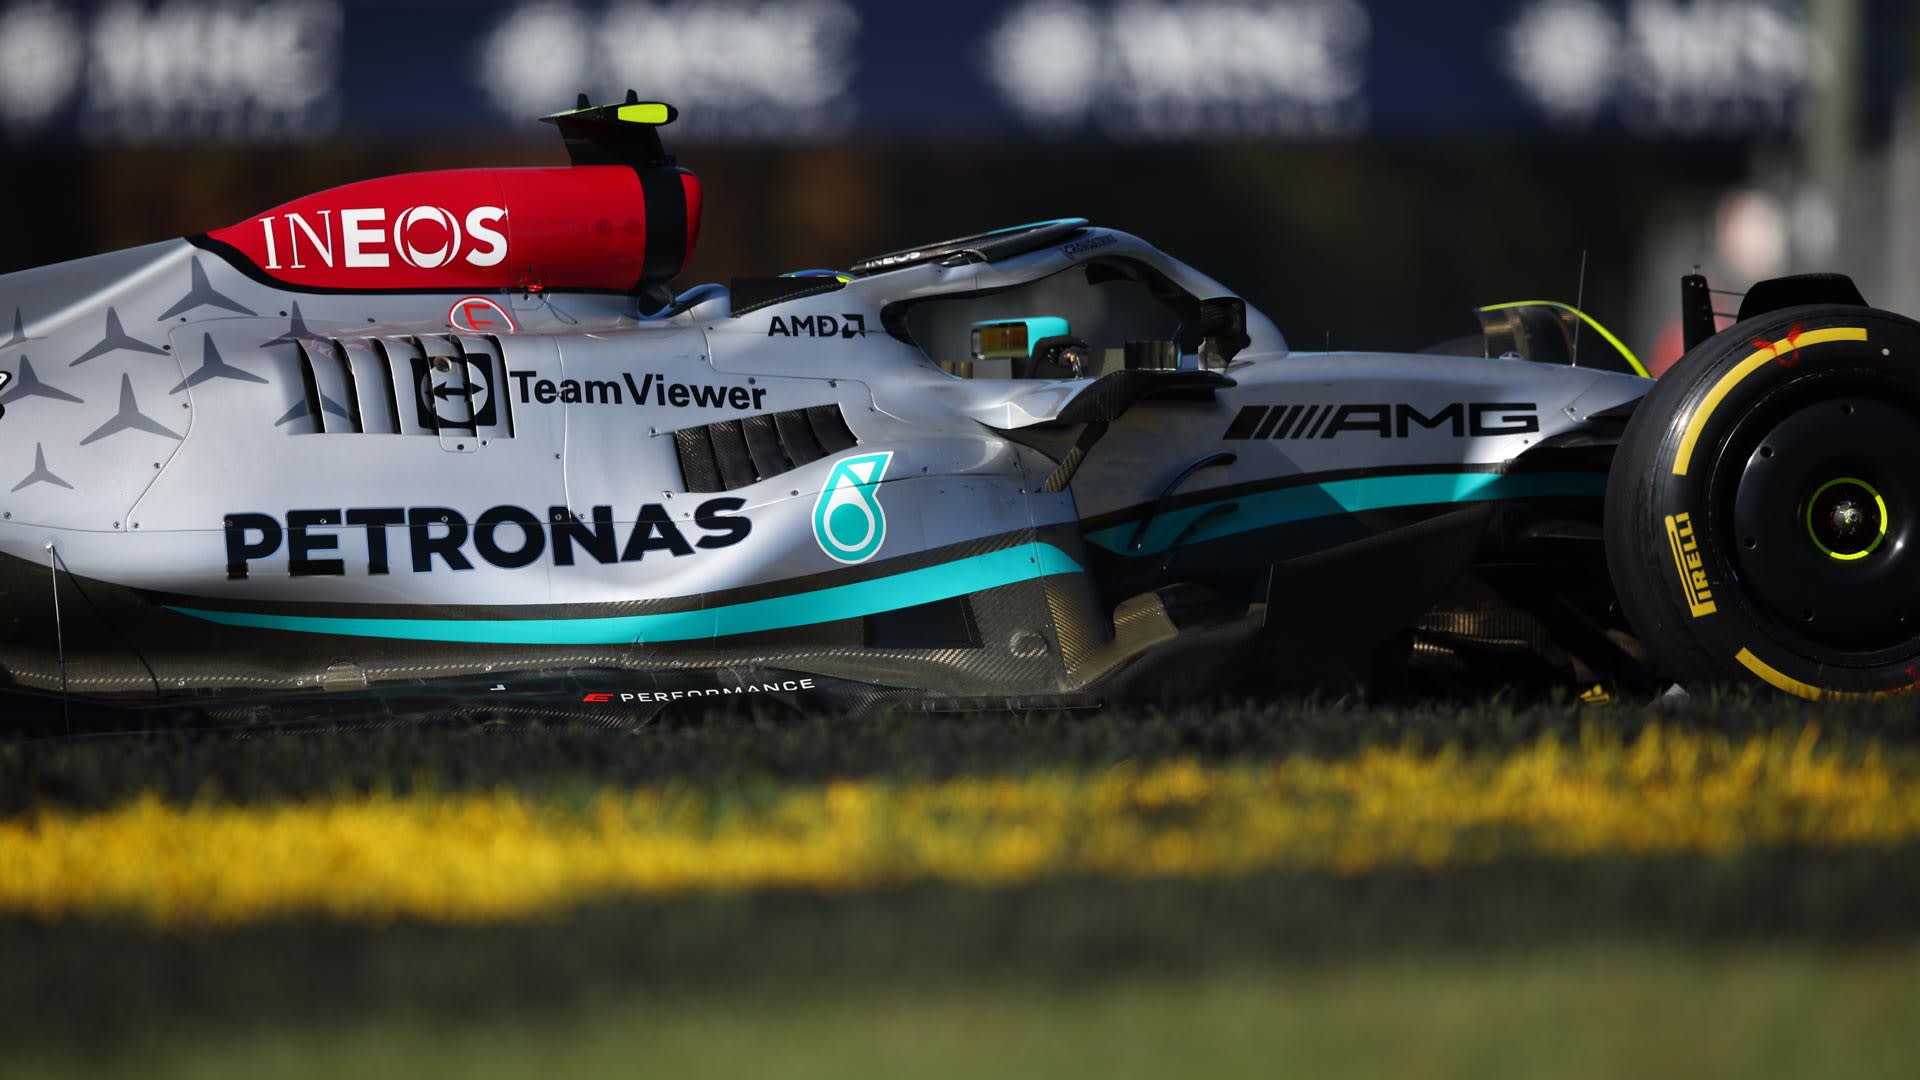 Mercedes and Petronas extend partnership into F1’s new sustainable